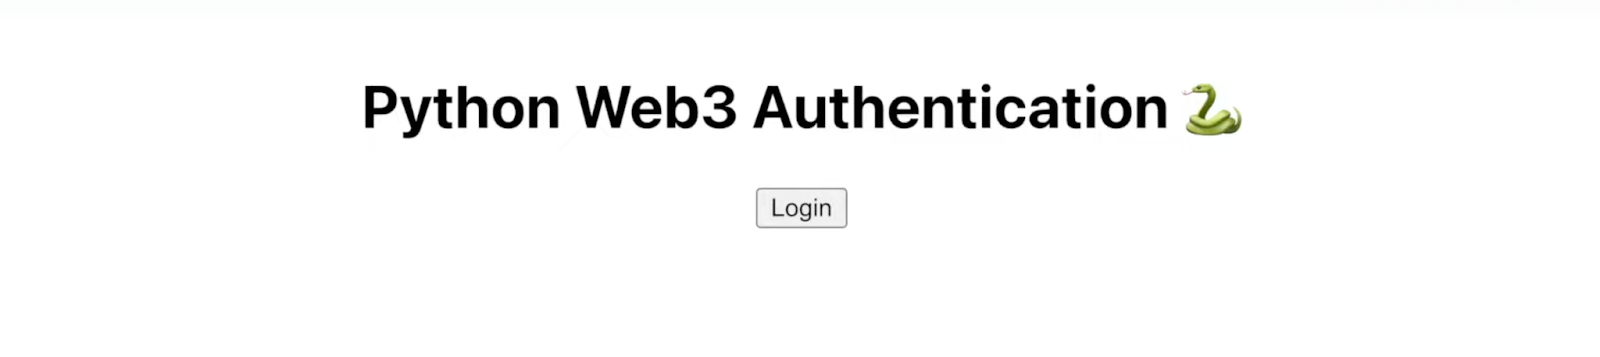 application page showing the title called python web3 authentication and a login button